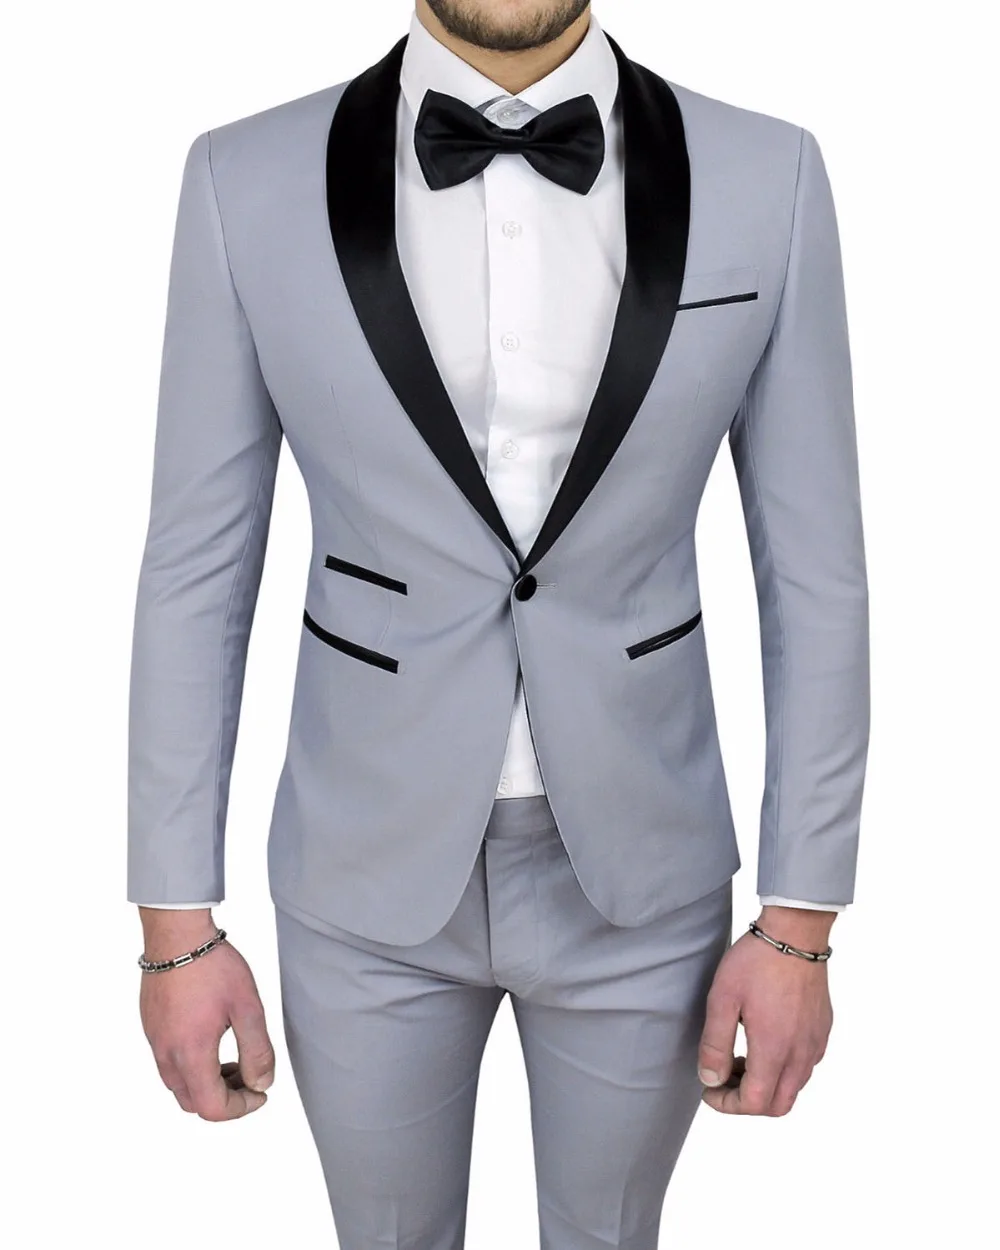 2022 Custom Made One Button Groomsman Wedding Suits For Men Light Gray Best Man Suit Men Groom Tuxedos Prom Suits